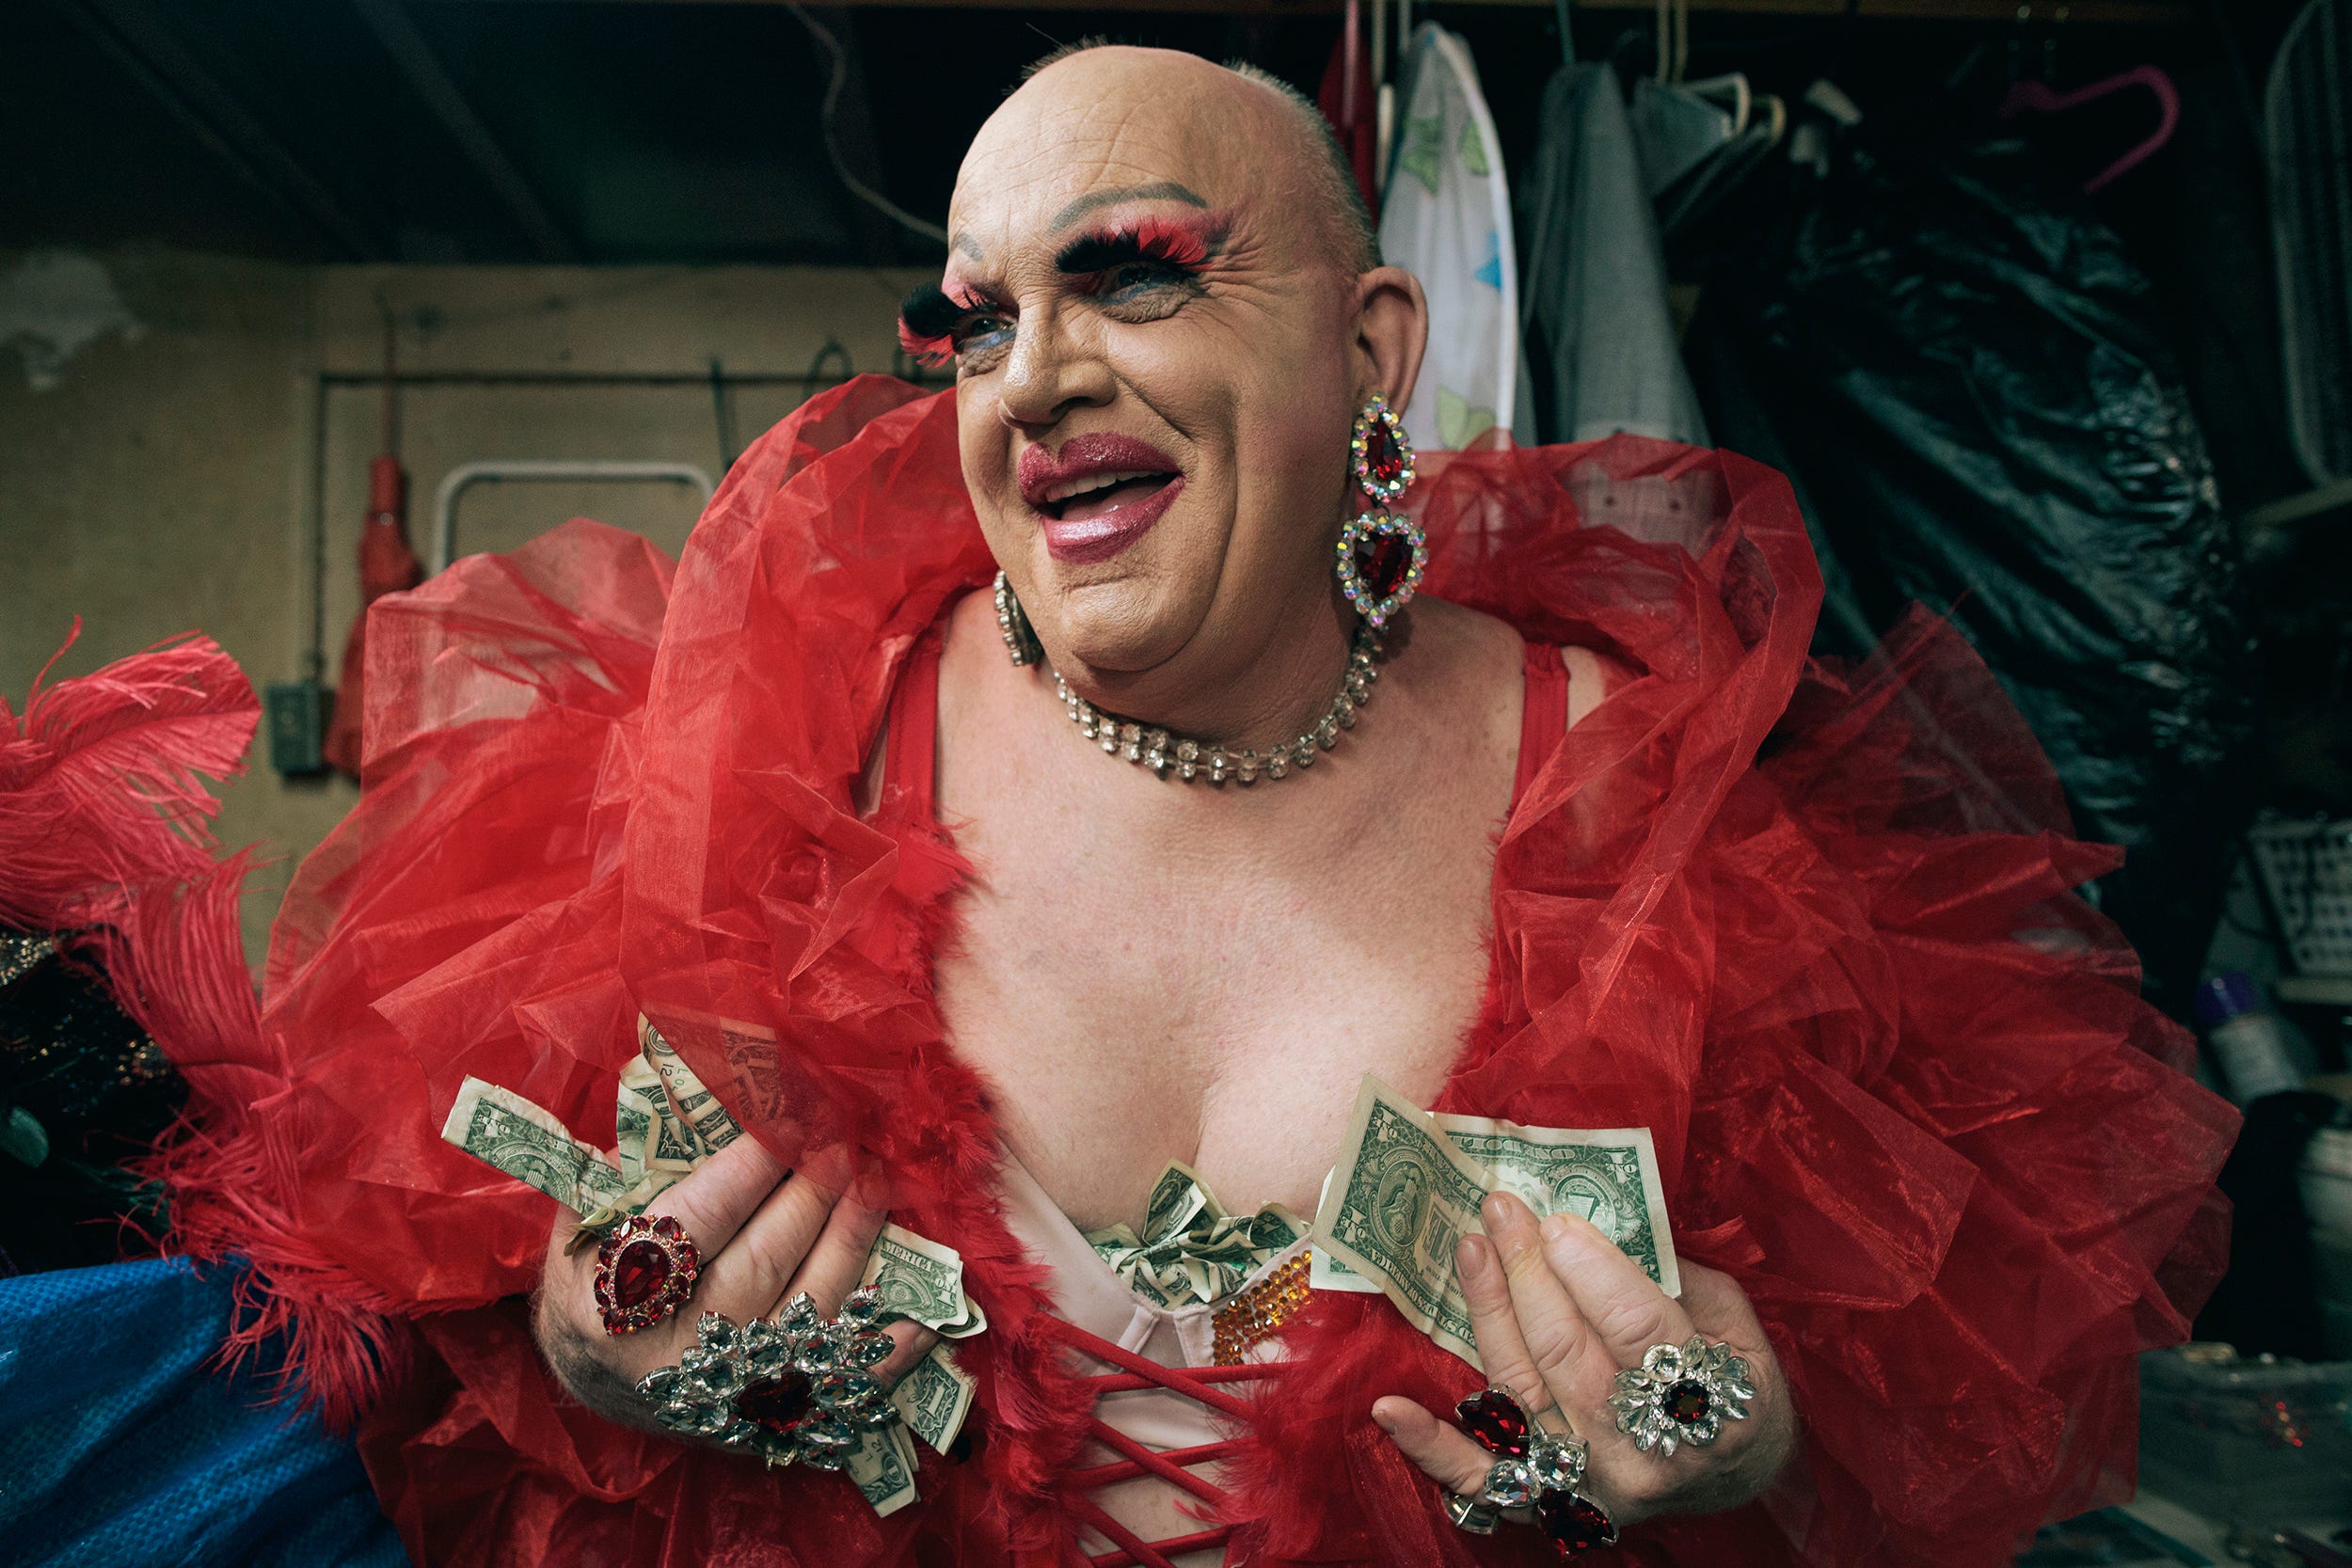 A Look Behind the Curtain at San Franciscos Drag Institution by Vilen Gabrielyan The Bold Italic pic